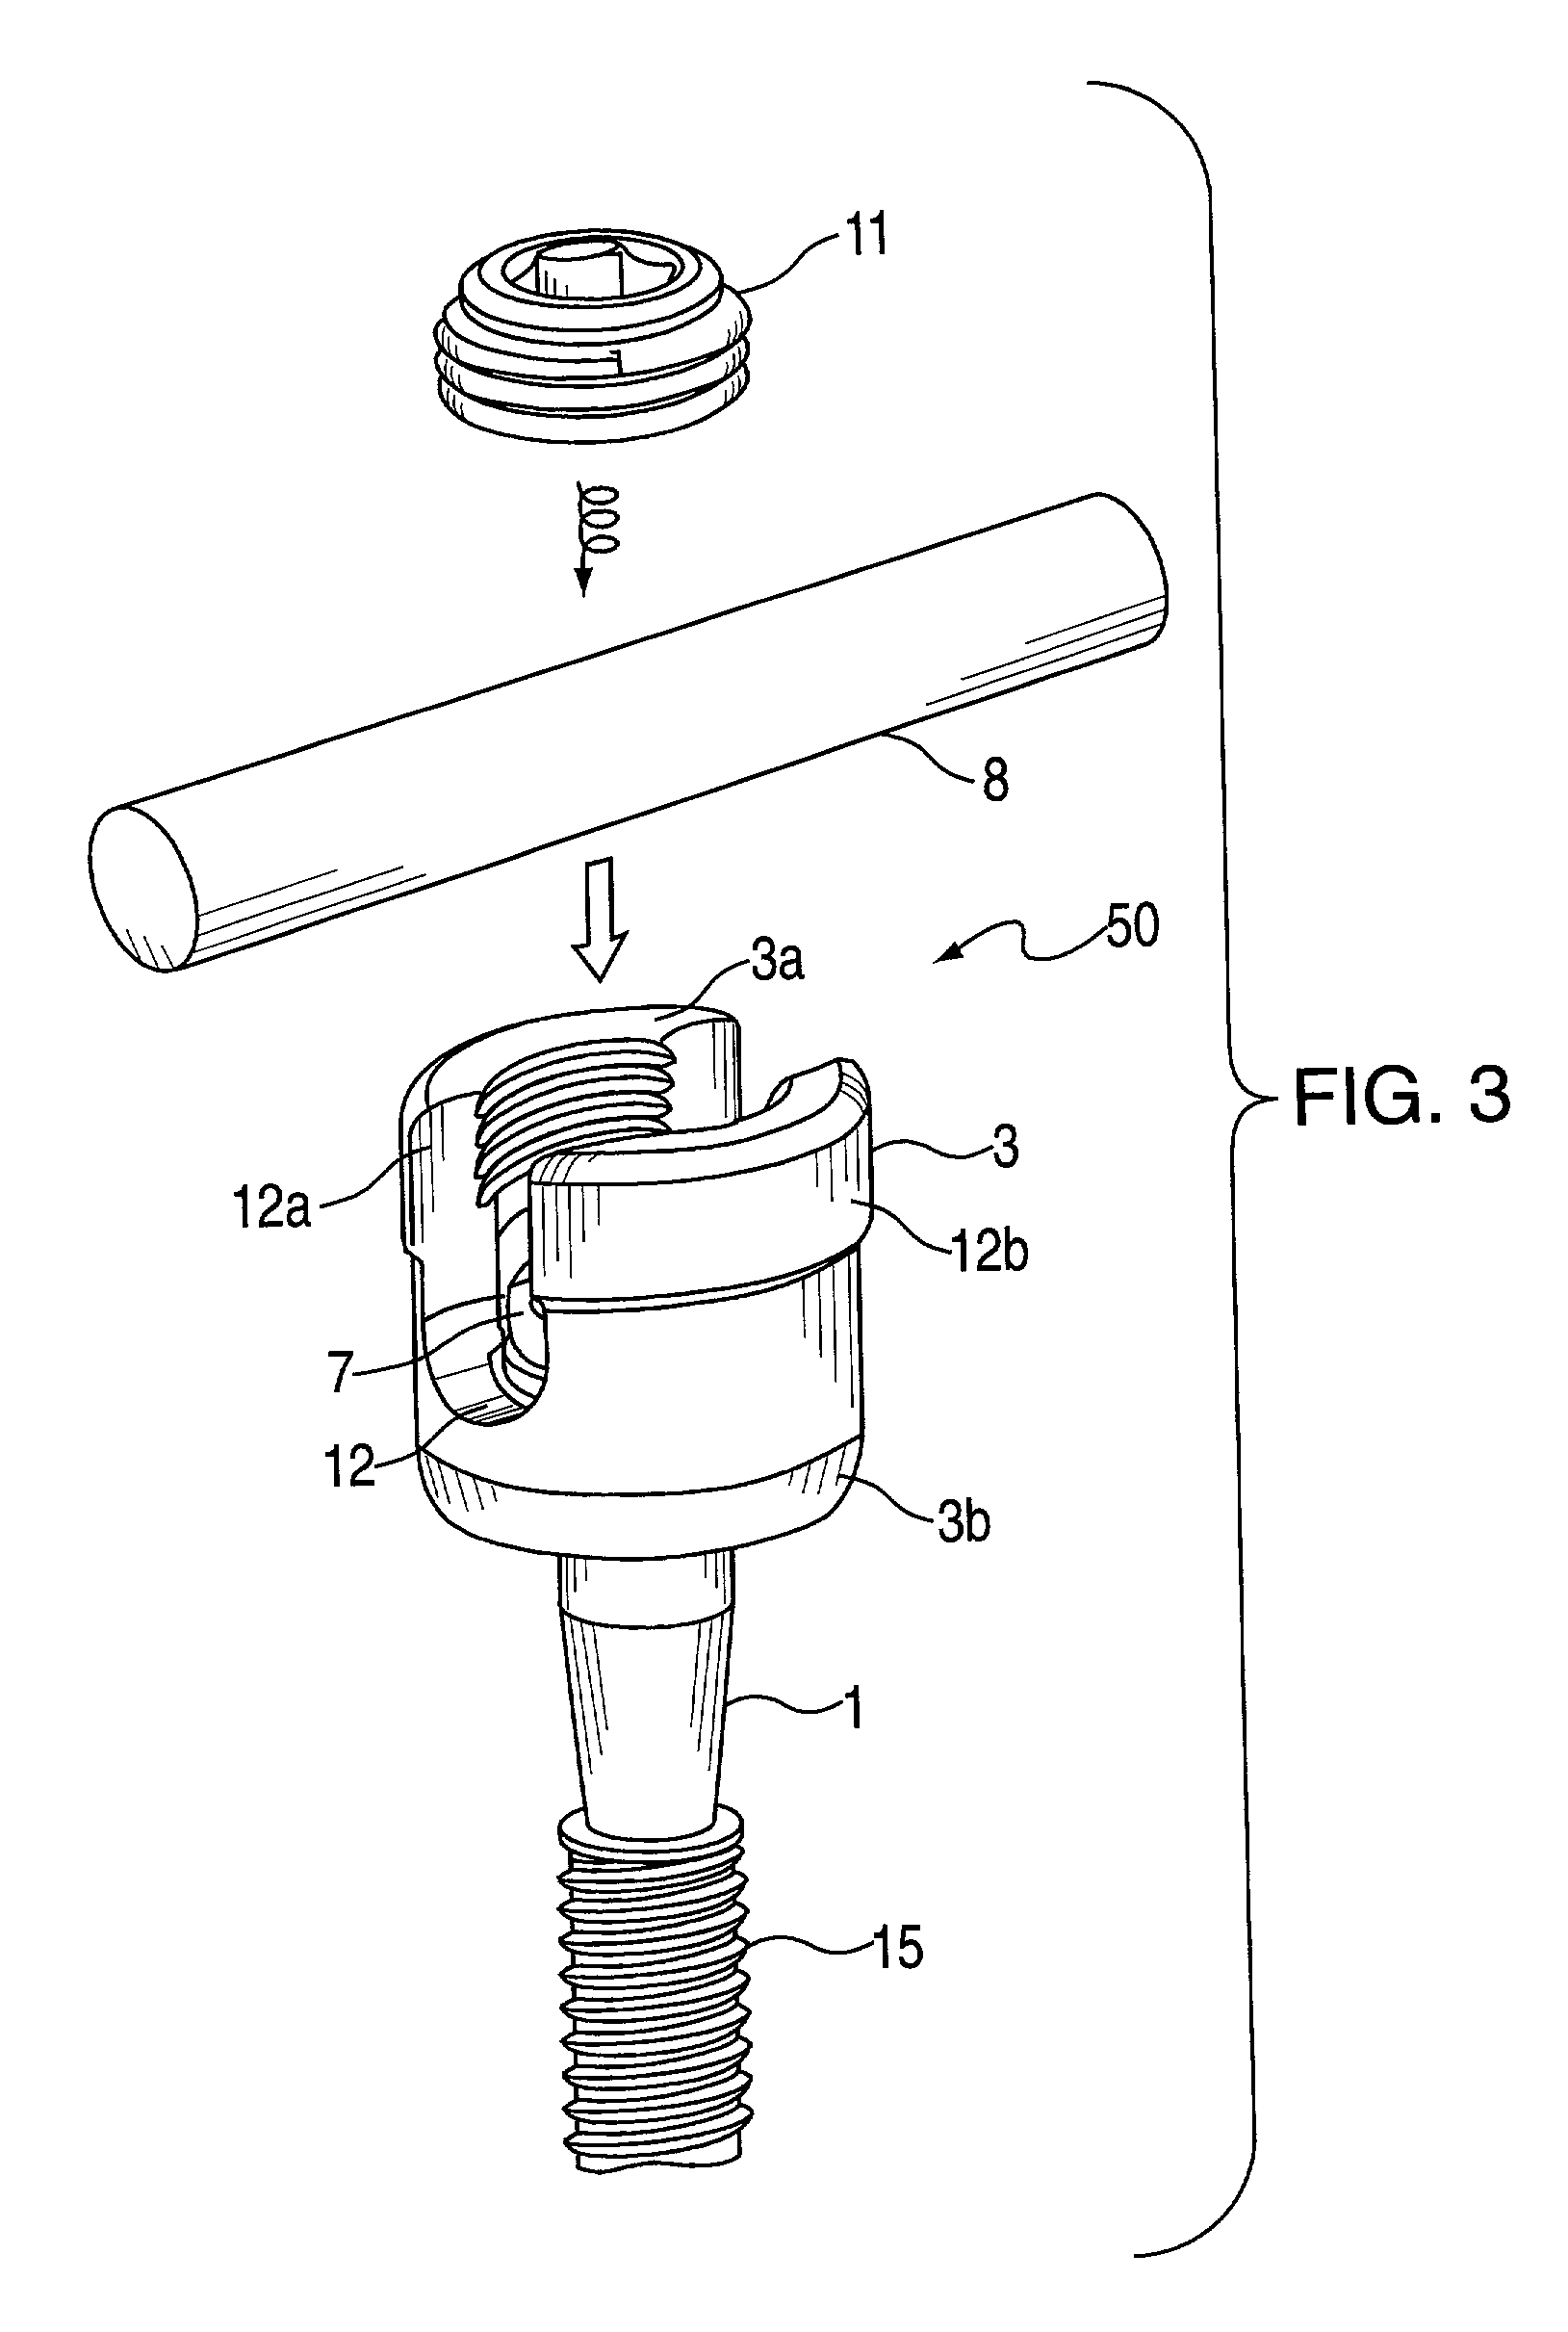 Surgical screw system and related methods